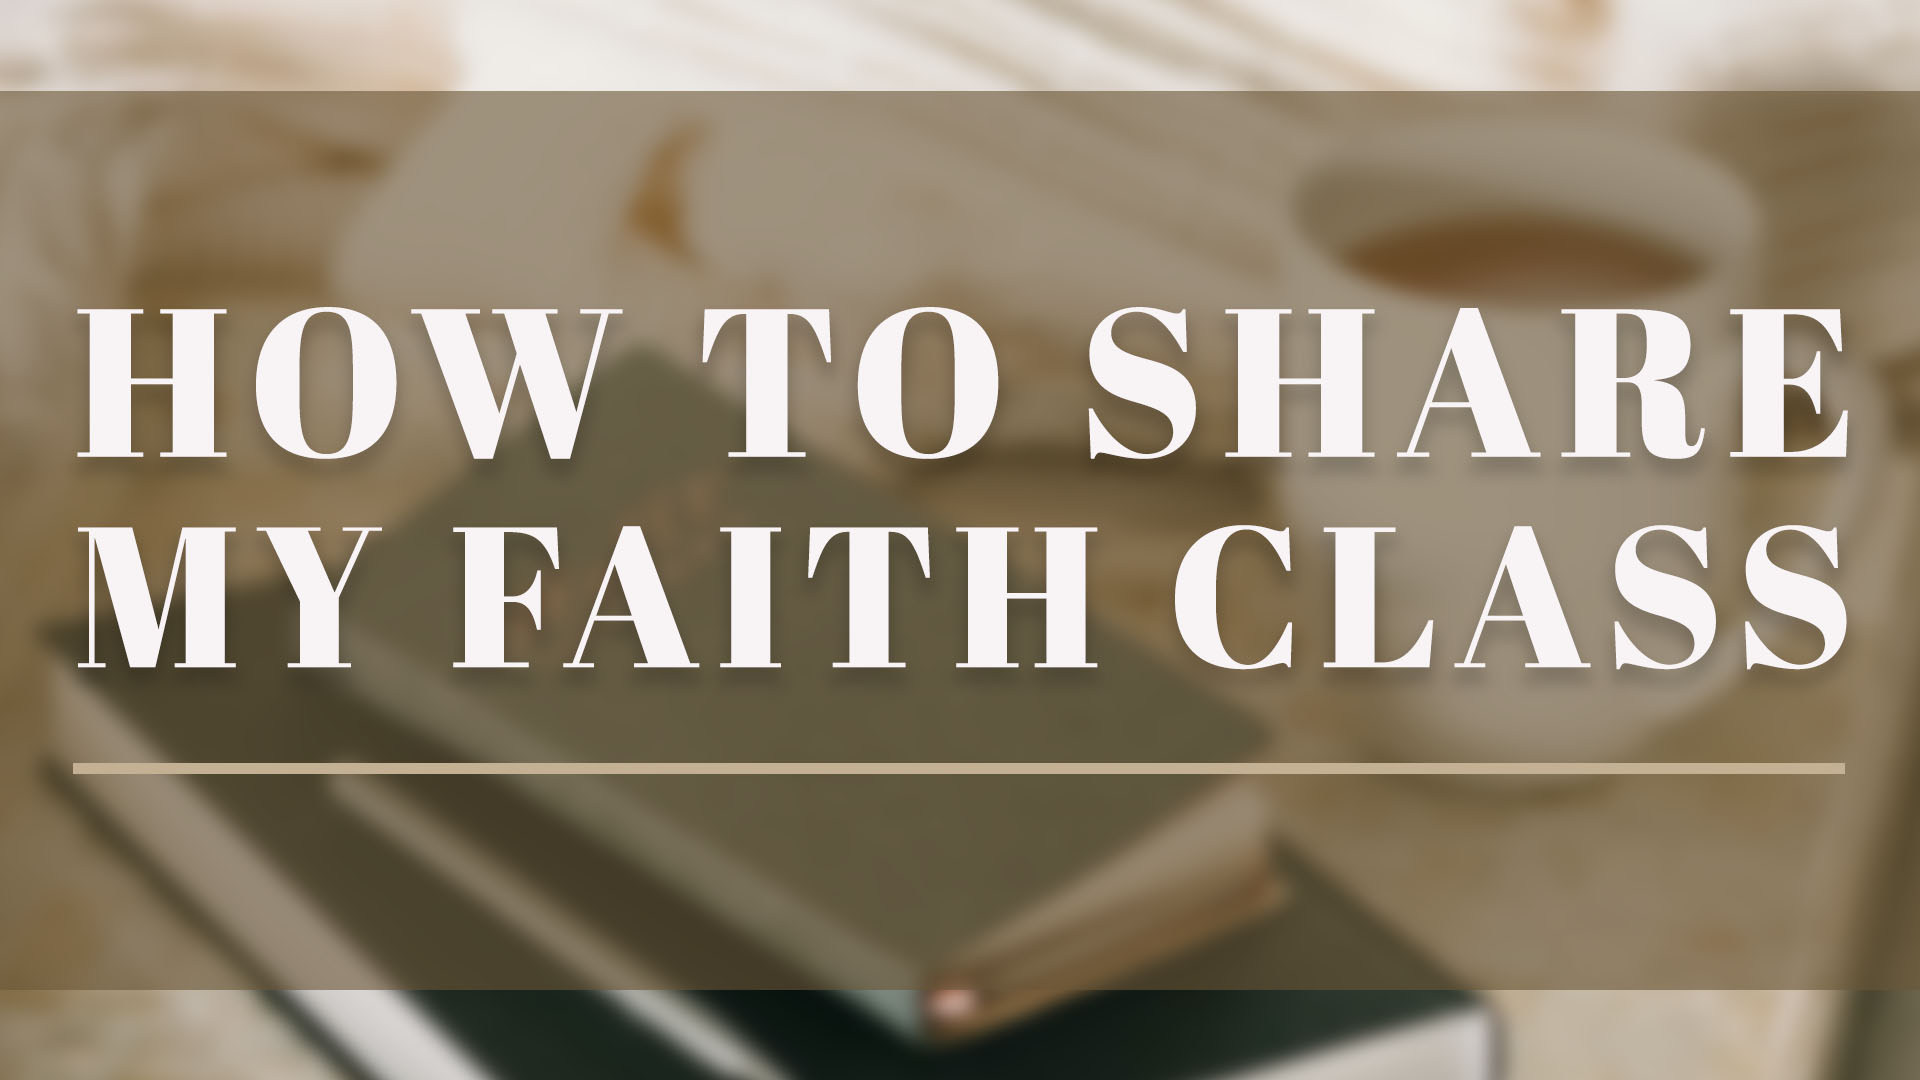 How To Share My Faith

Meeting at Grace Church
Saturday | 5:00pm
August 10
